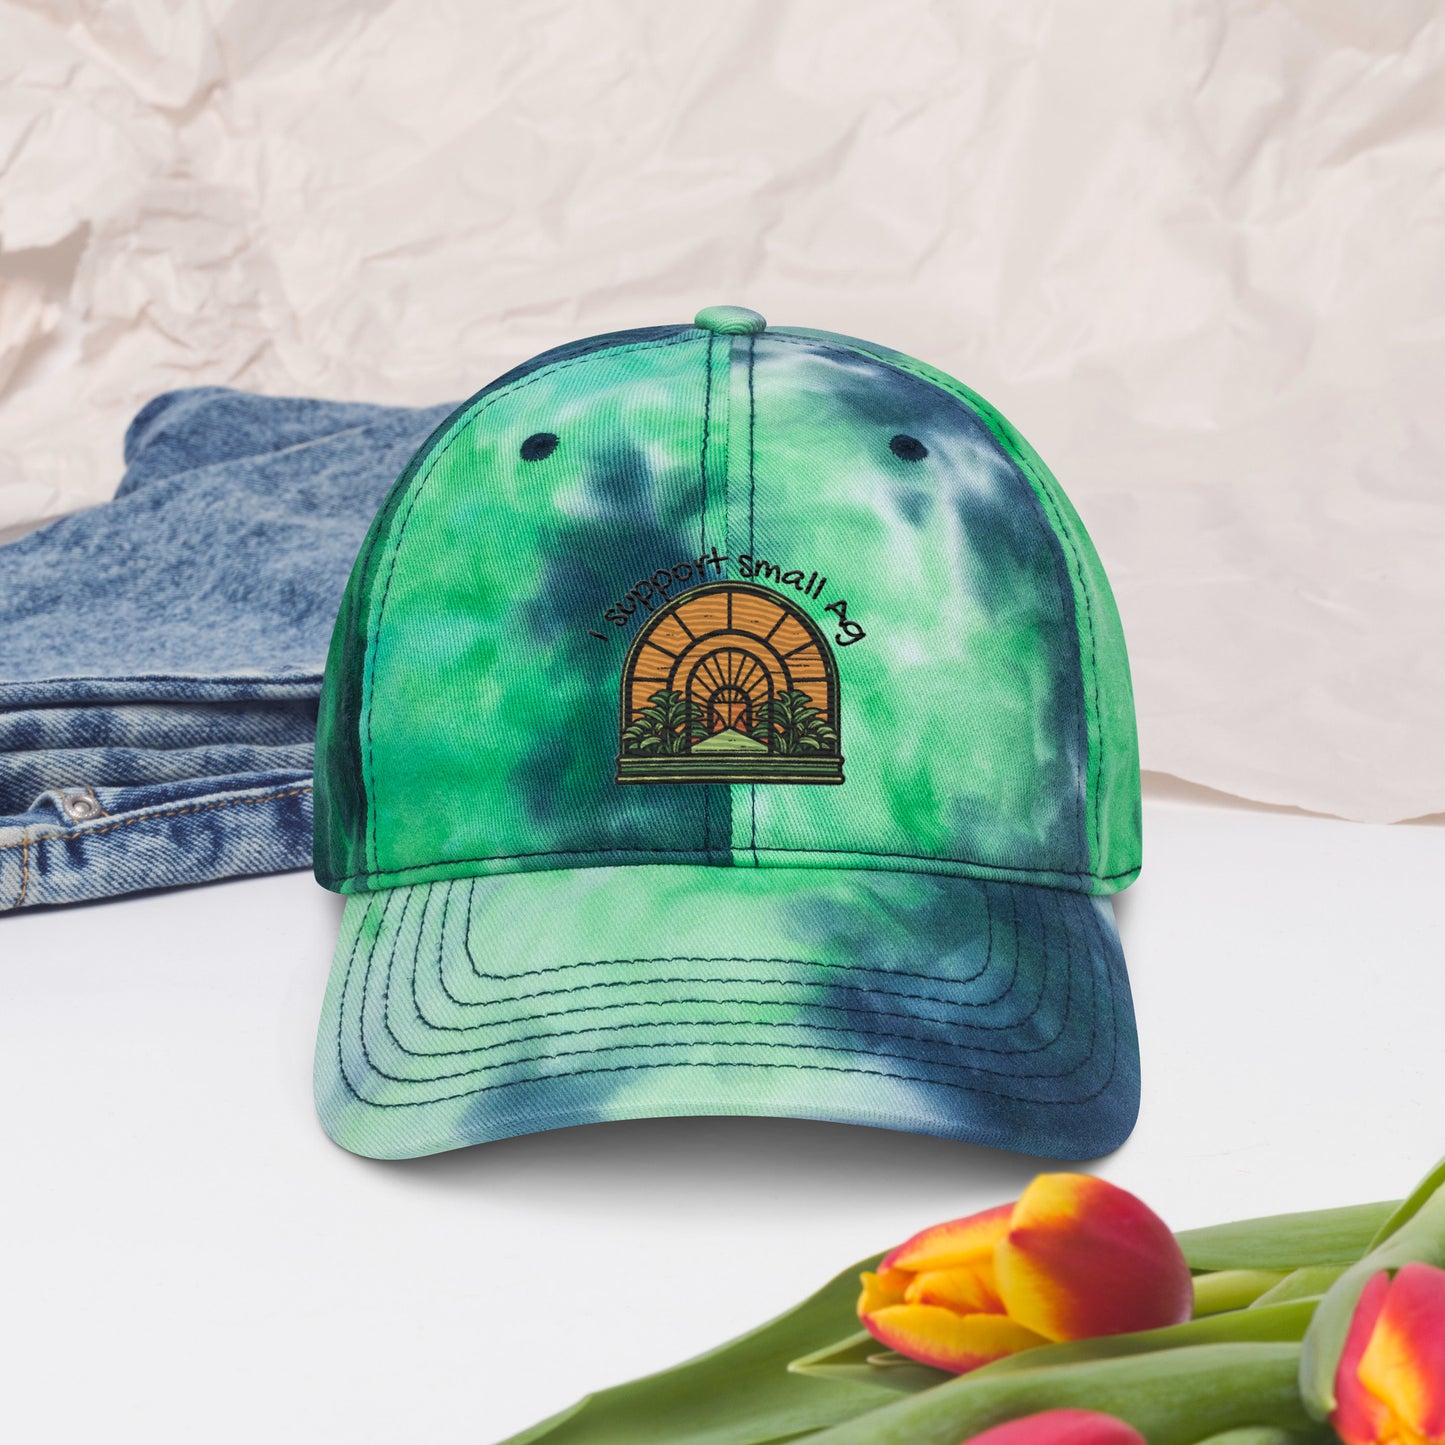 Tie dye hat: I Support Small Ag